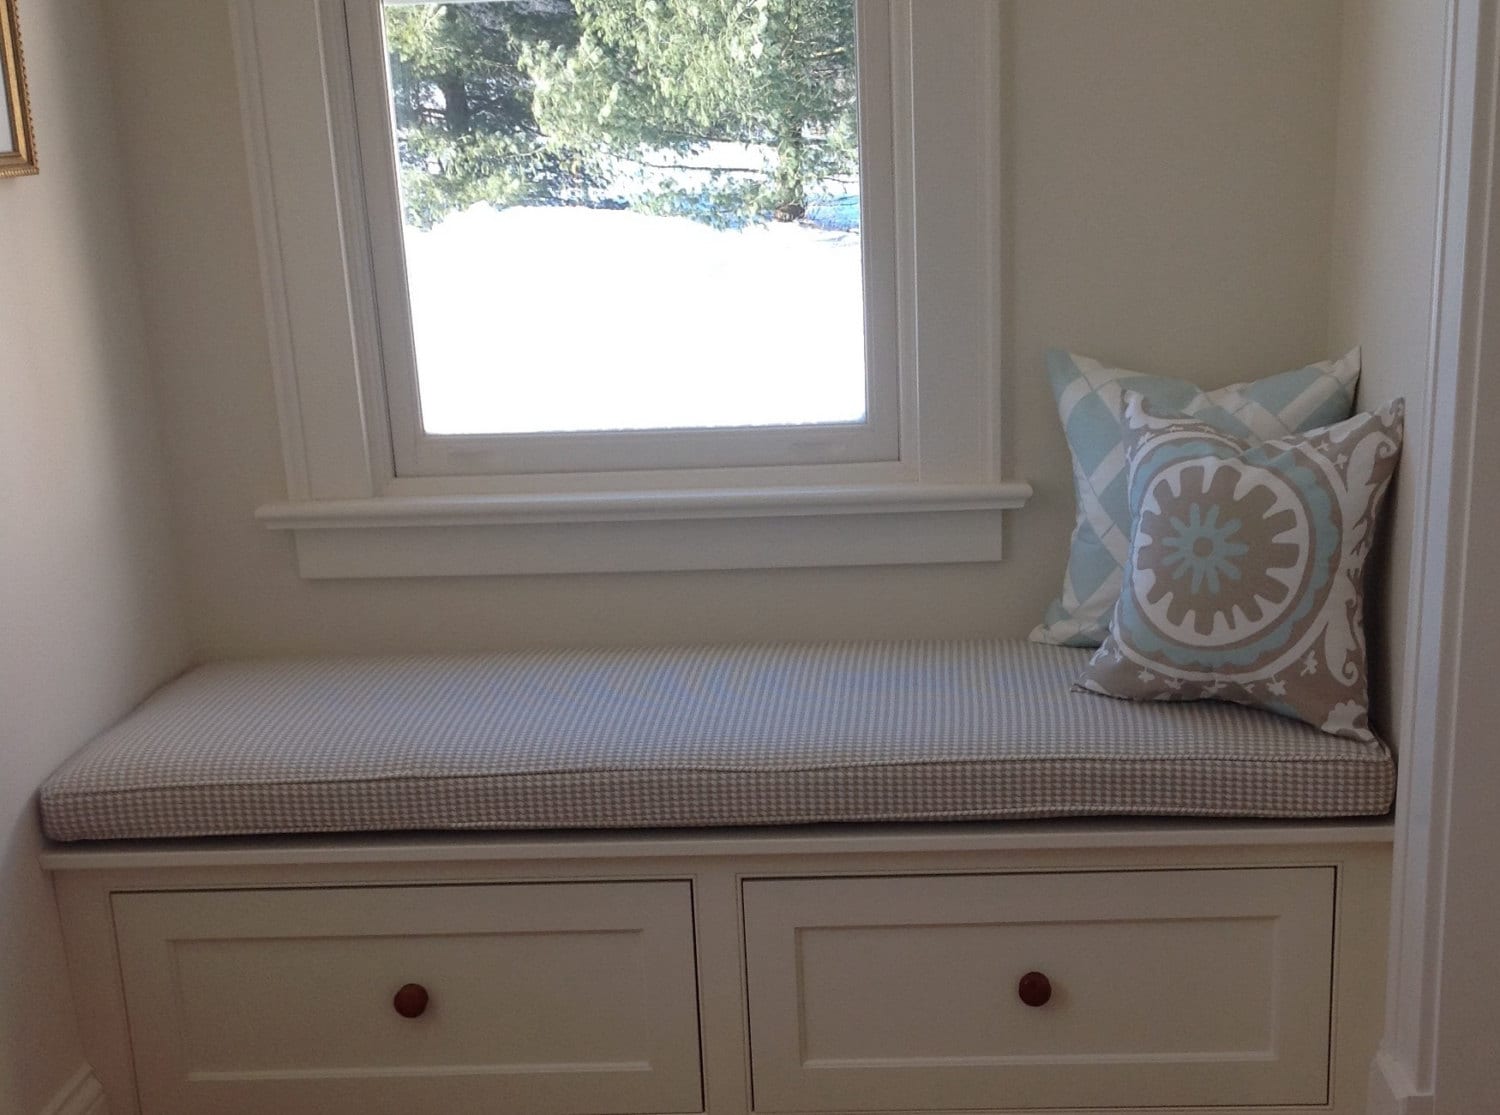 Custom Bench Cushion With Piping 